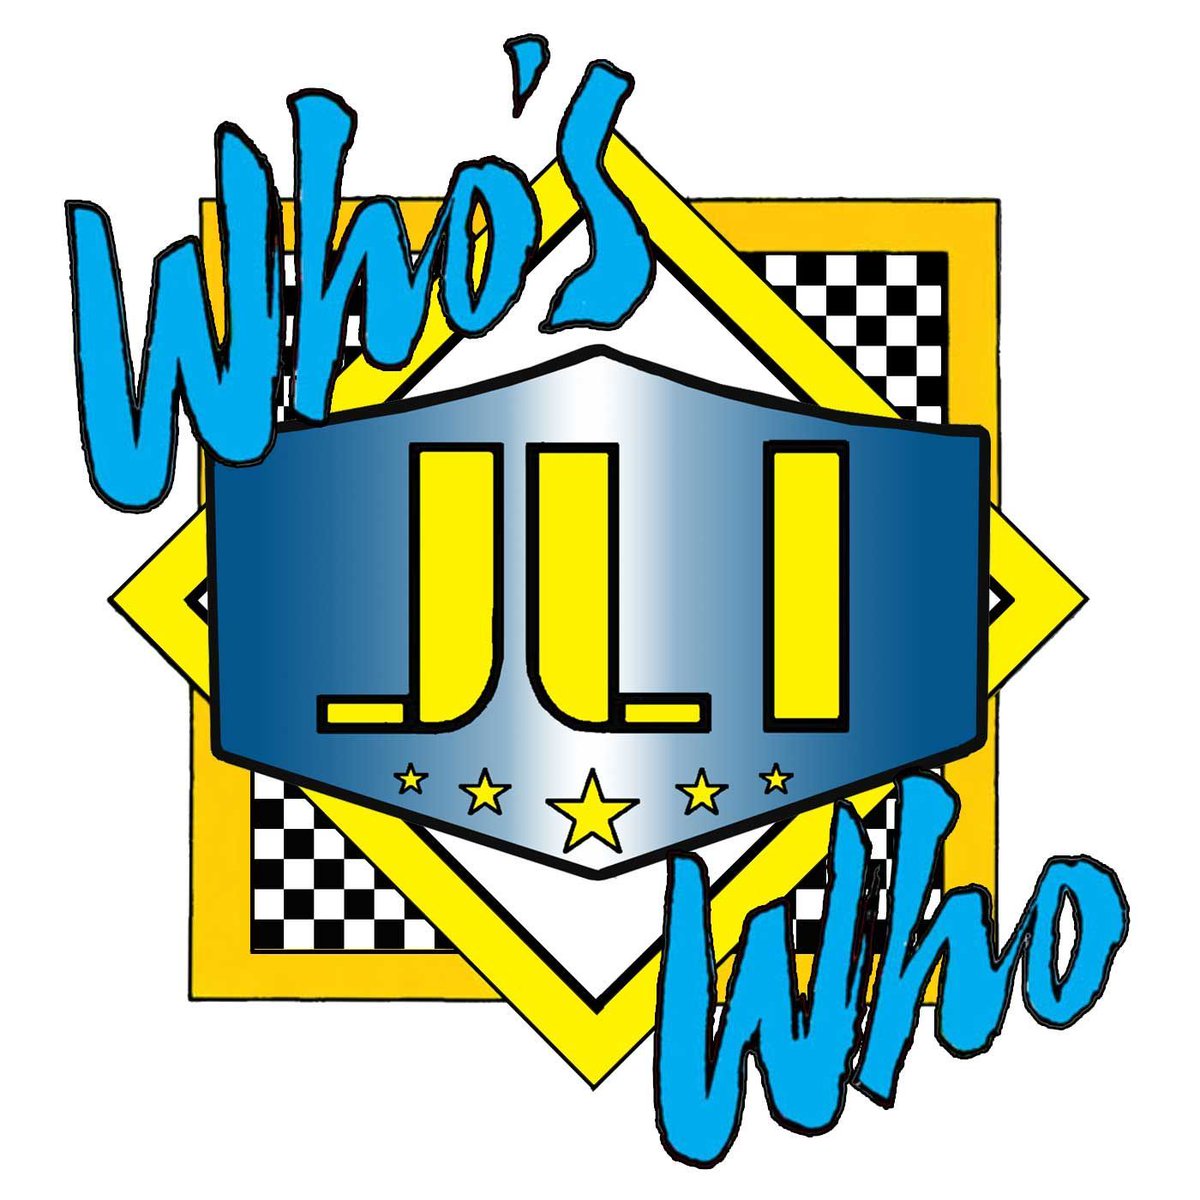 New WHO'S WHO PODCAST! In this 'Flashback' special we present clips from old episodes, covering 35 different JLI entries from WHO'S WHO IN THE DC UNIVERSE! Plus, we reveal a brand new custom loose leaf WHO'S WHO page for JUSTICE LEAUGE EUROPE! fireandwaterpodcast.com/podcast/jli-ww/